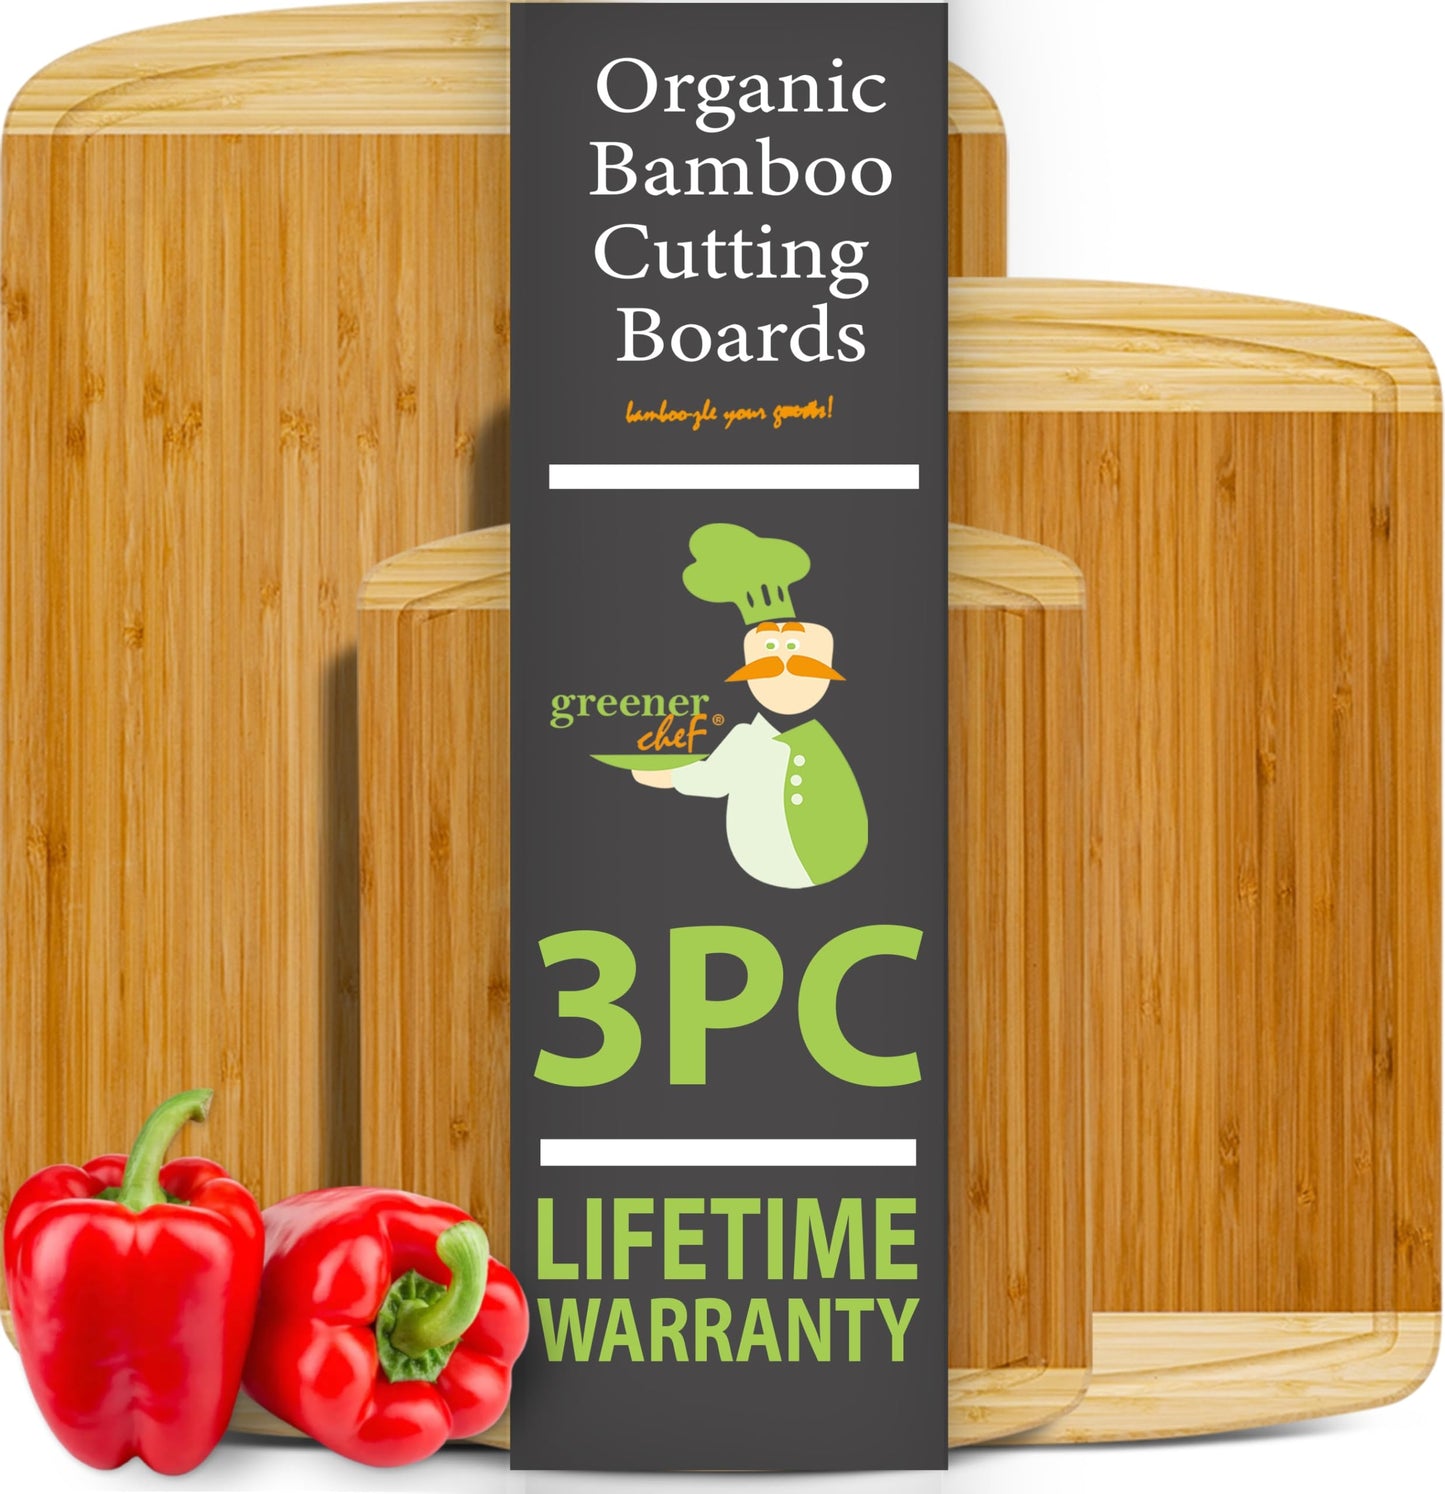 GREENER CHEF Organic Bamboo Cutting Board Set of 3 with Lifetime Replacements - Wood Cutting Board Set with Juice Groove - Wooden Chopping Board Set